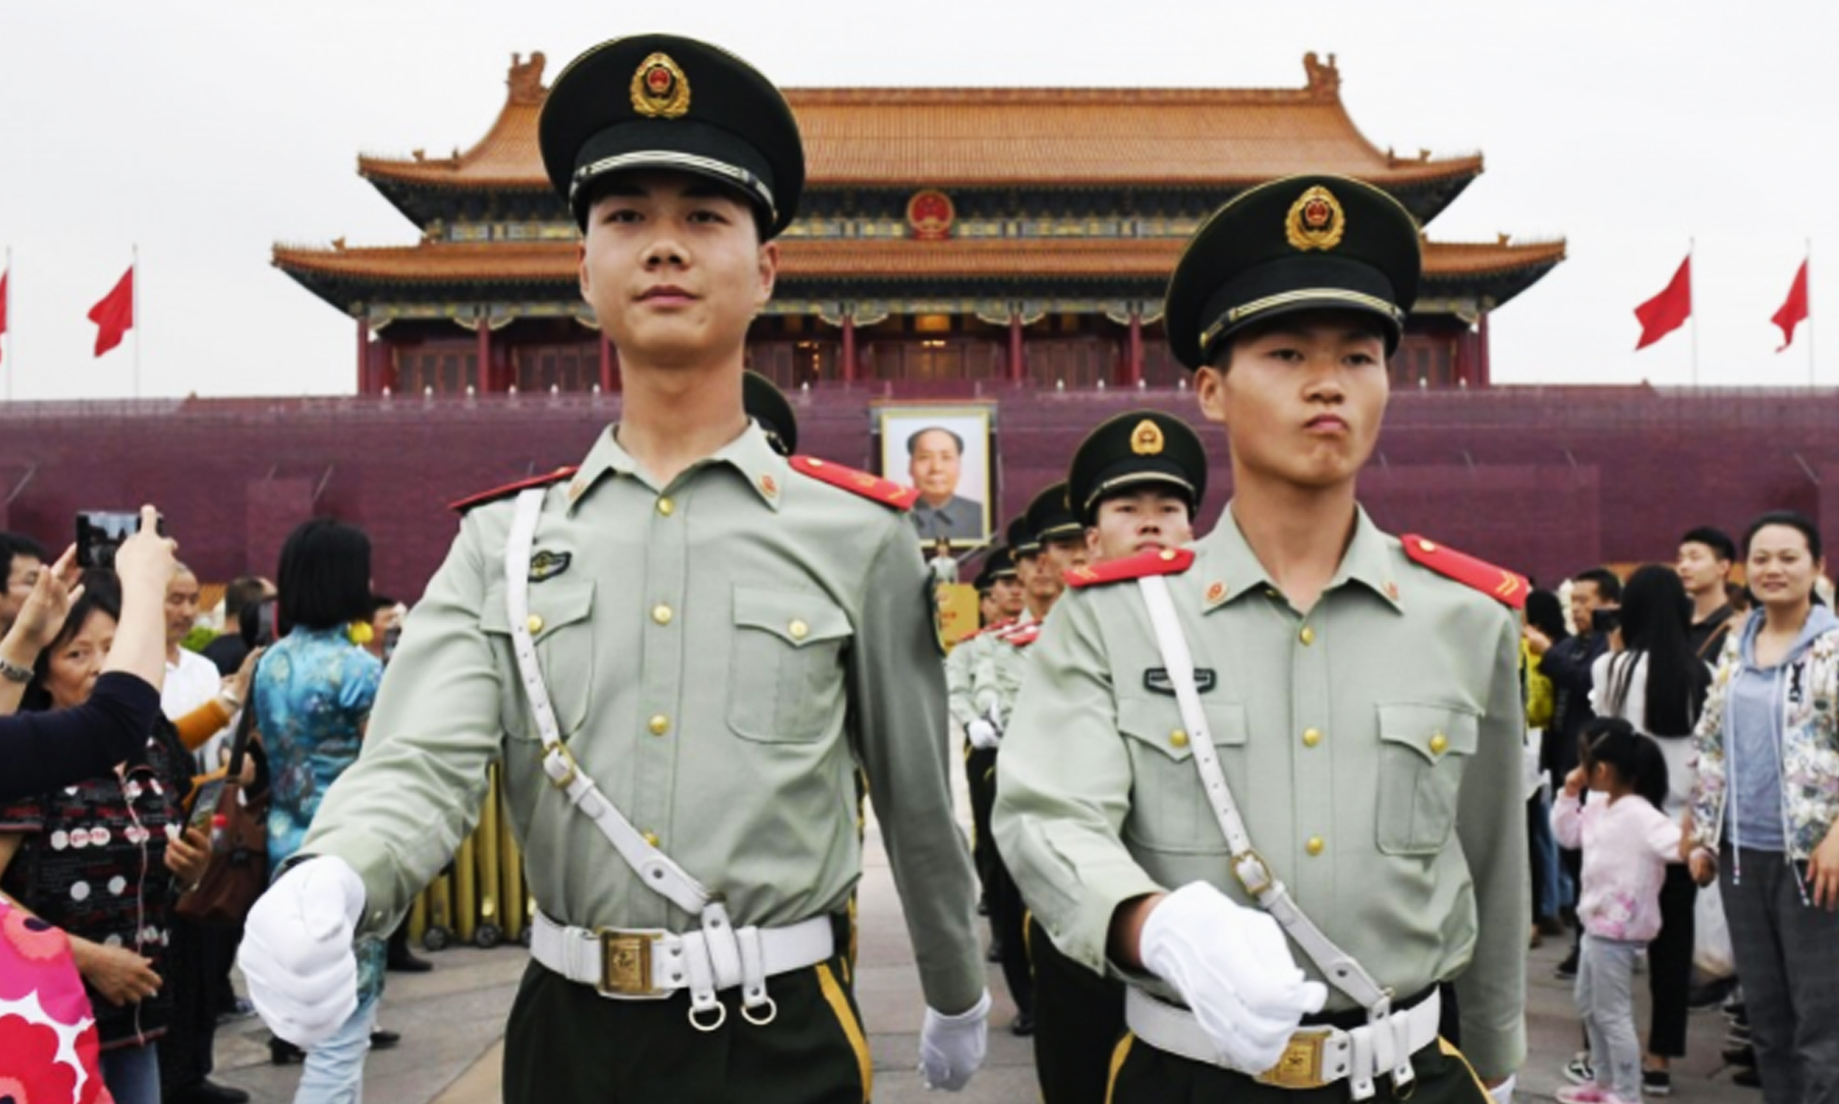 China remains vigilant against recurrence of Tiananmen protest